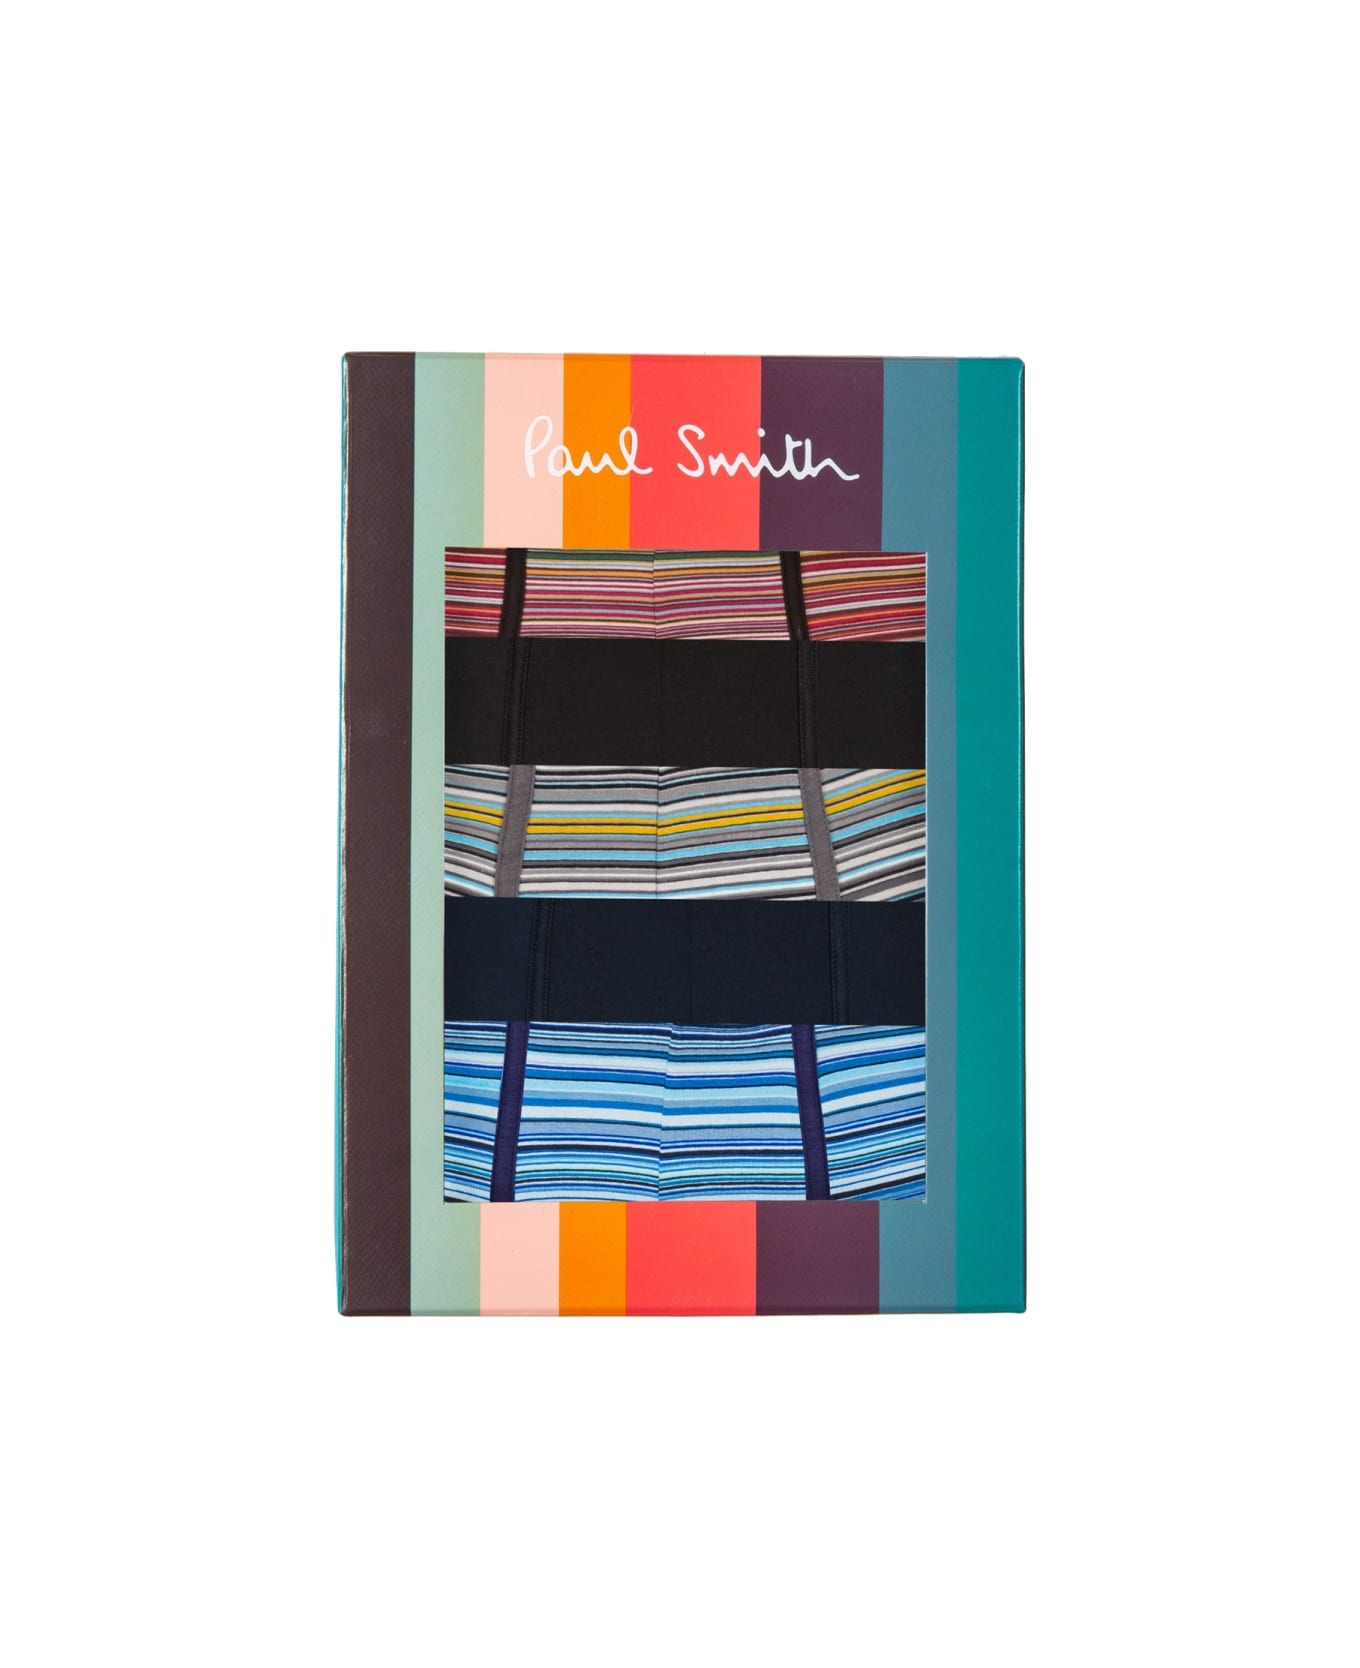 Paul Smith Pack Of Five Boxer Shorts - MULTICOLOUR